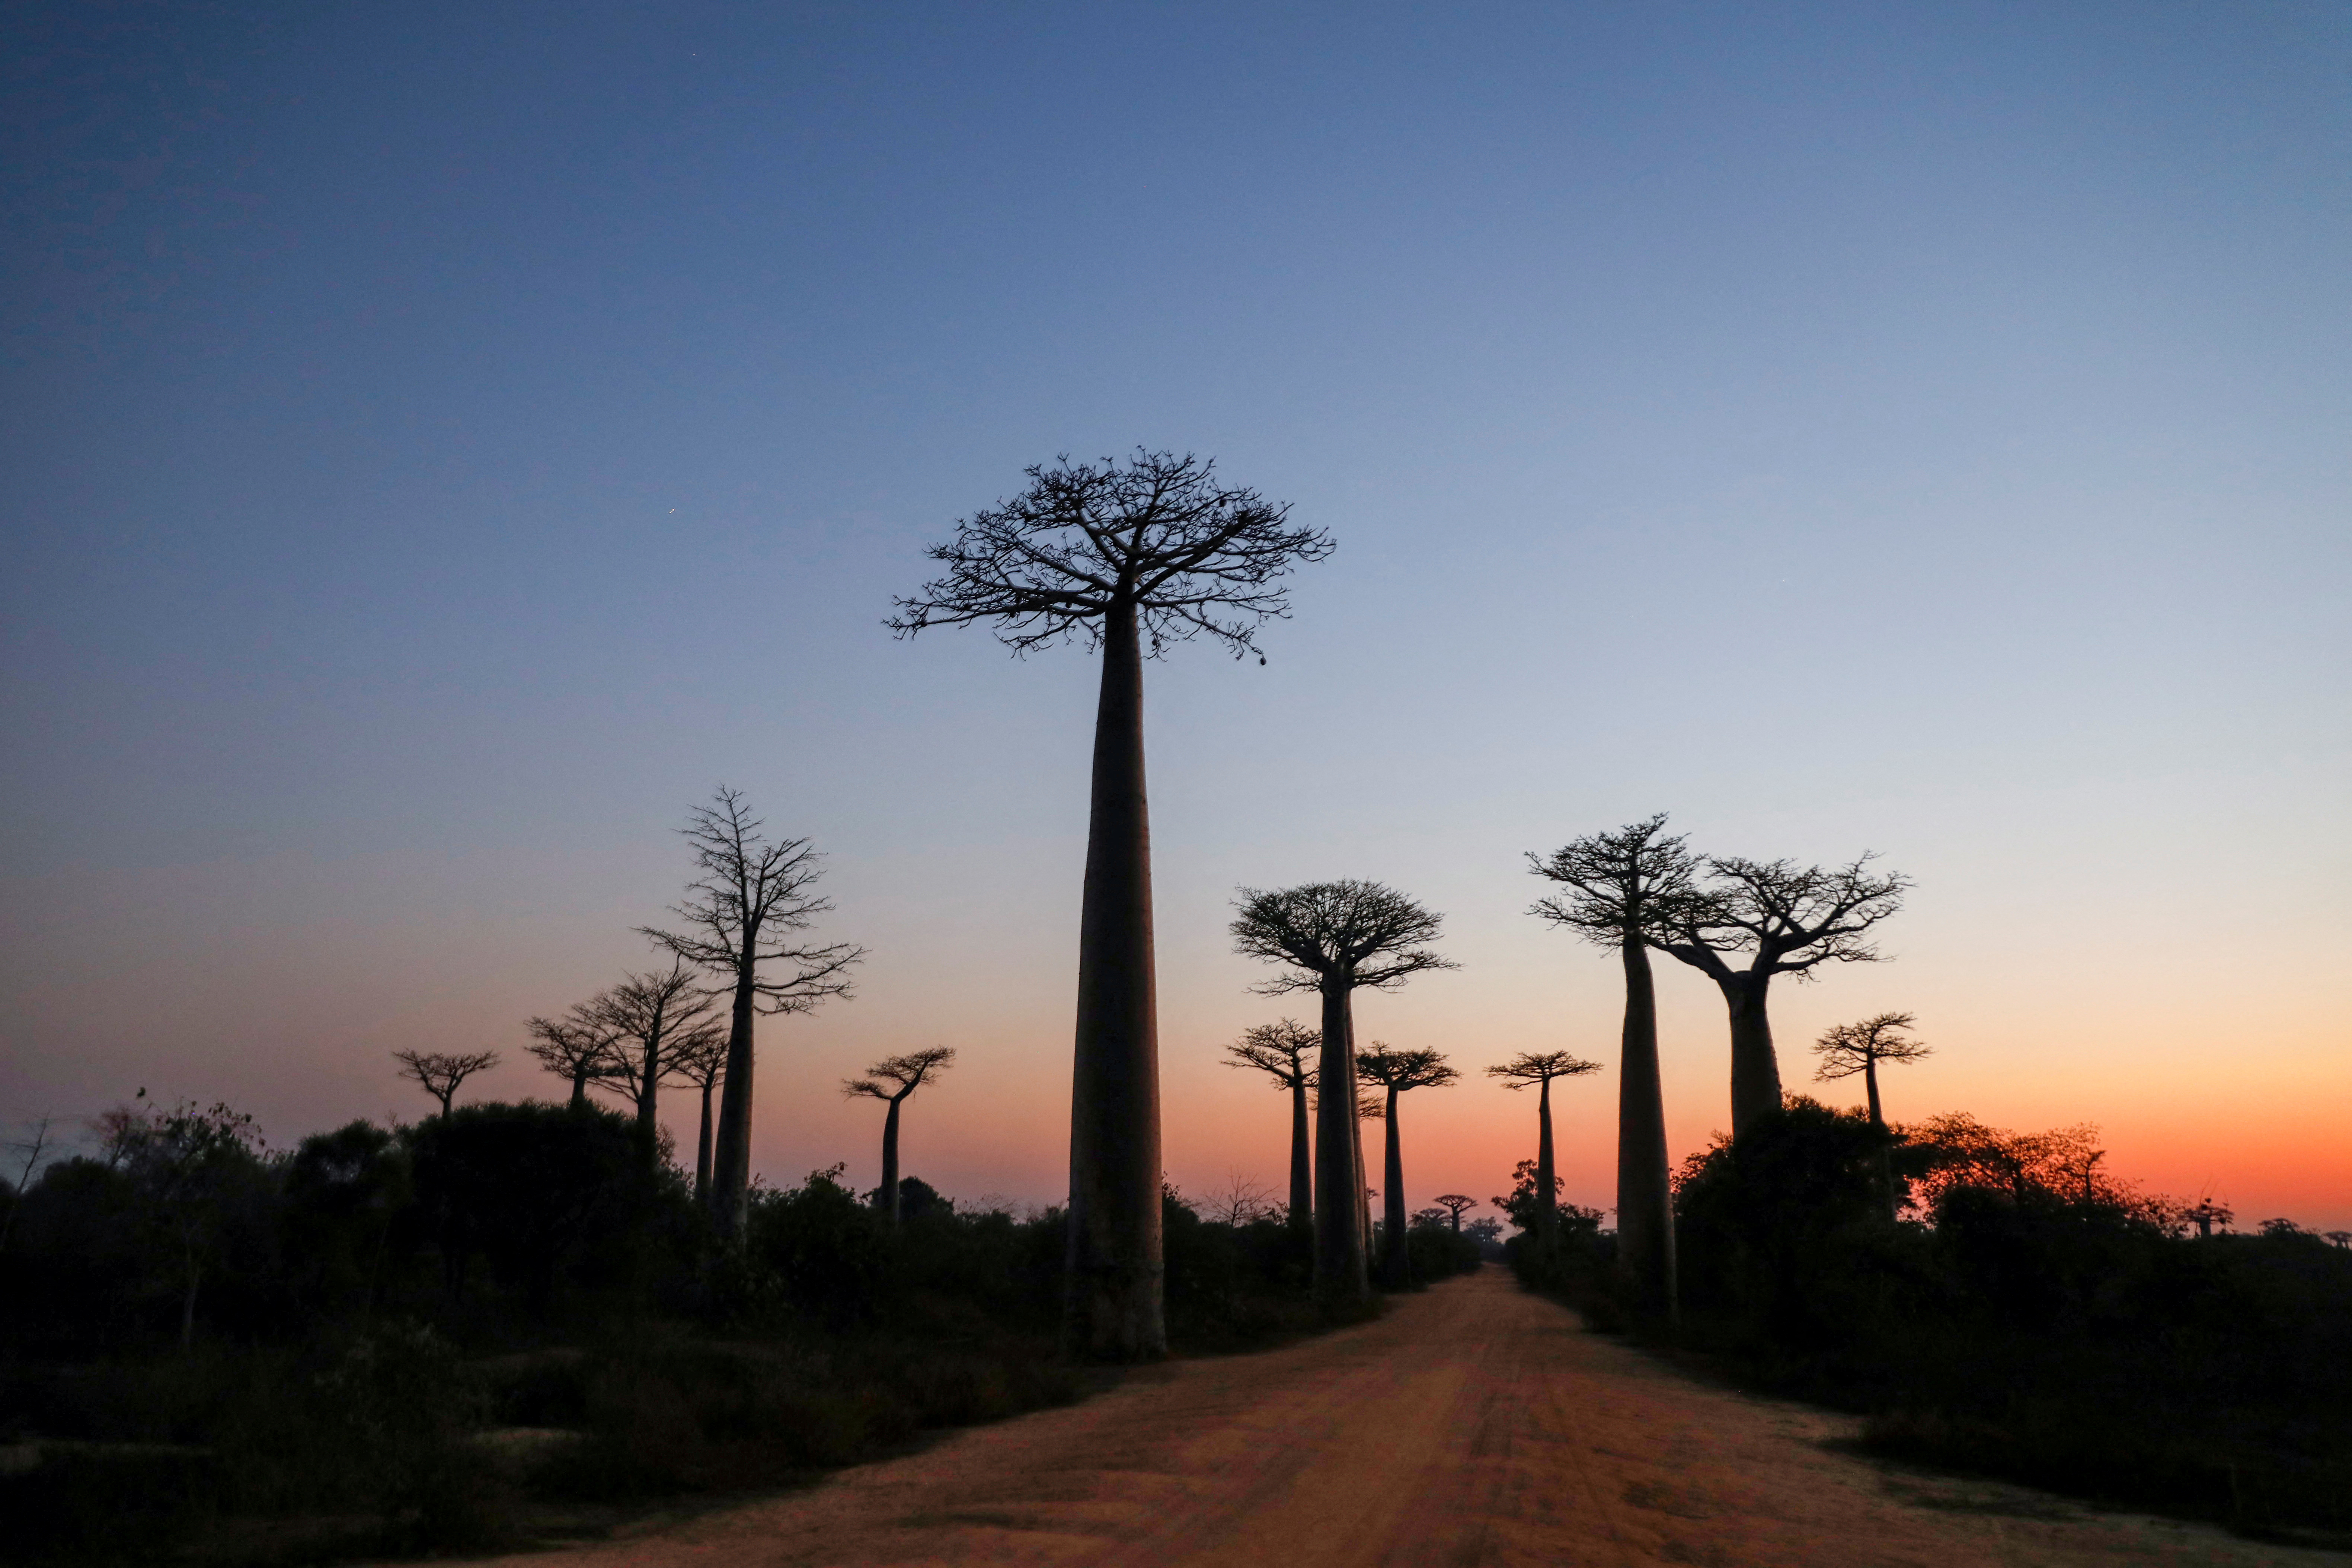 Baobab trees are seen at sun rises in Baobab alley near the city of Morondava